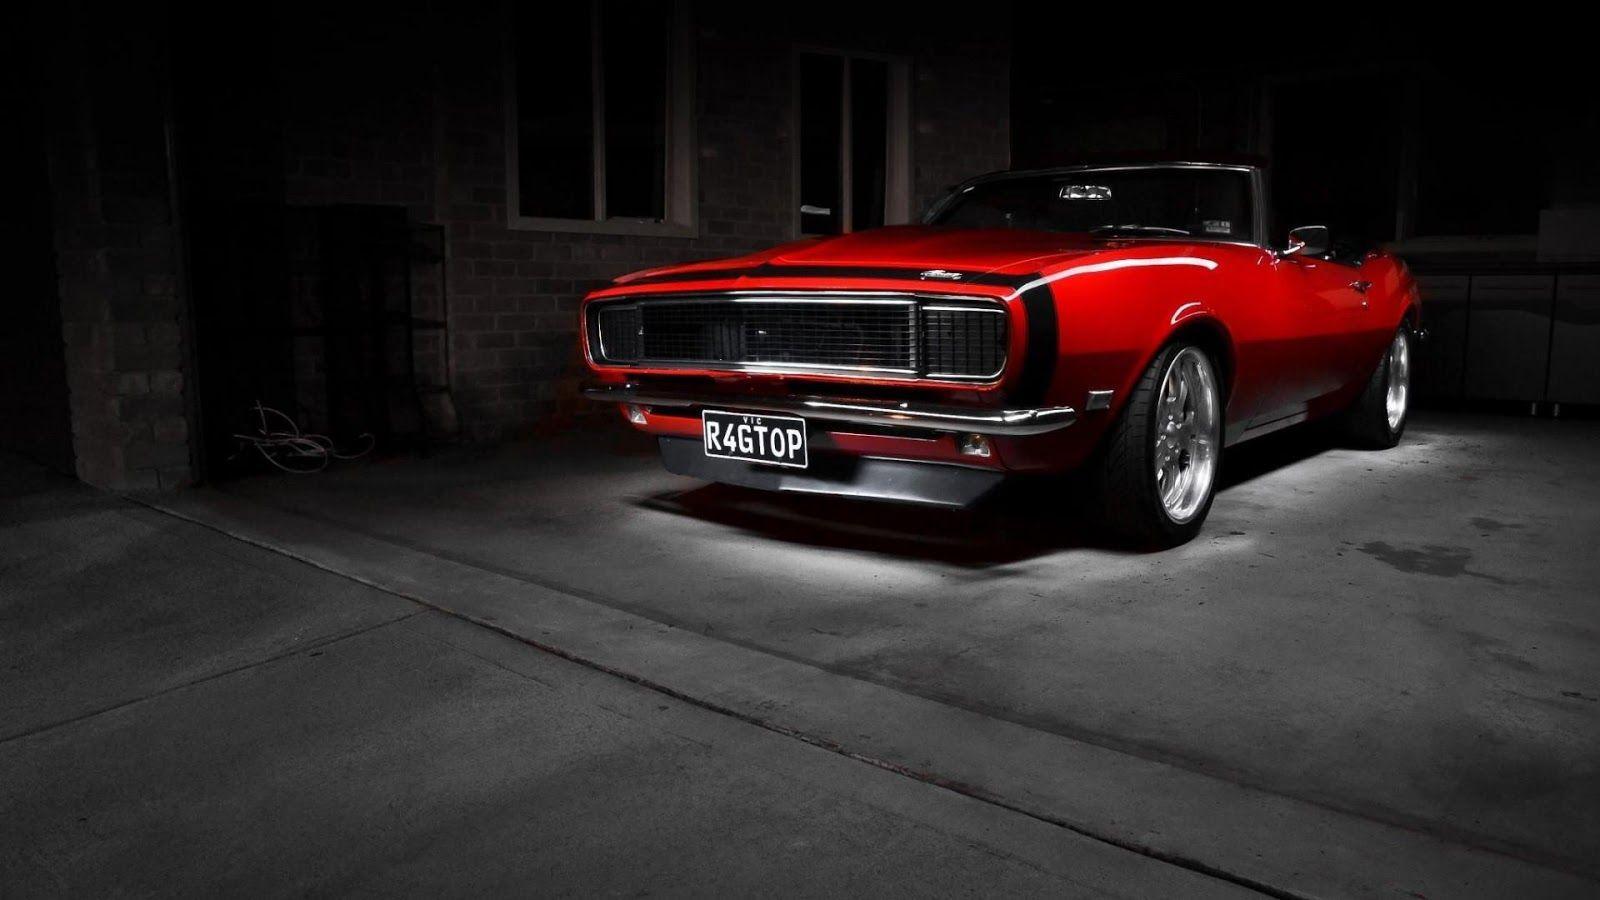 American Muscle Car Wallpaper Apps on Google Play